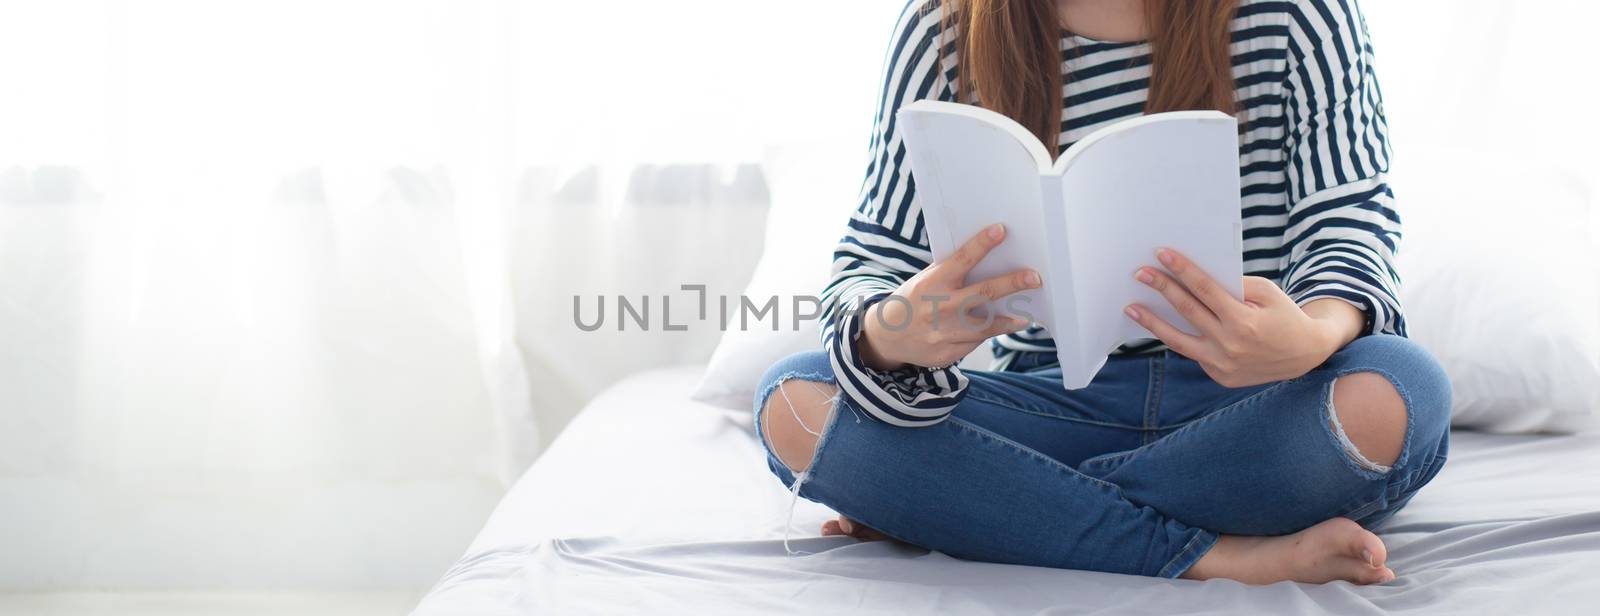 Banner website beautiful asian woman relax sitting reading book on bedroom at home, girl study literature, education and llifestyle concept.